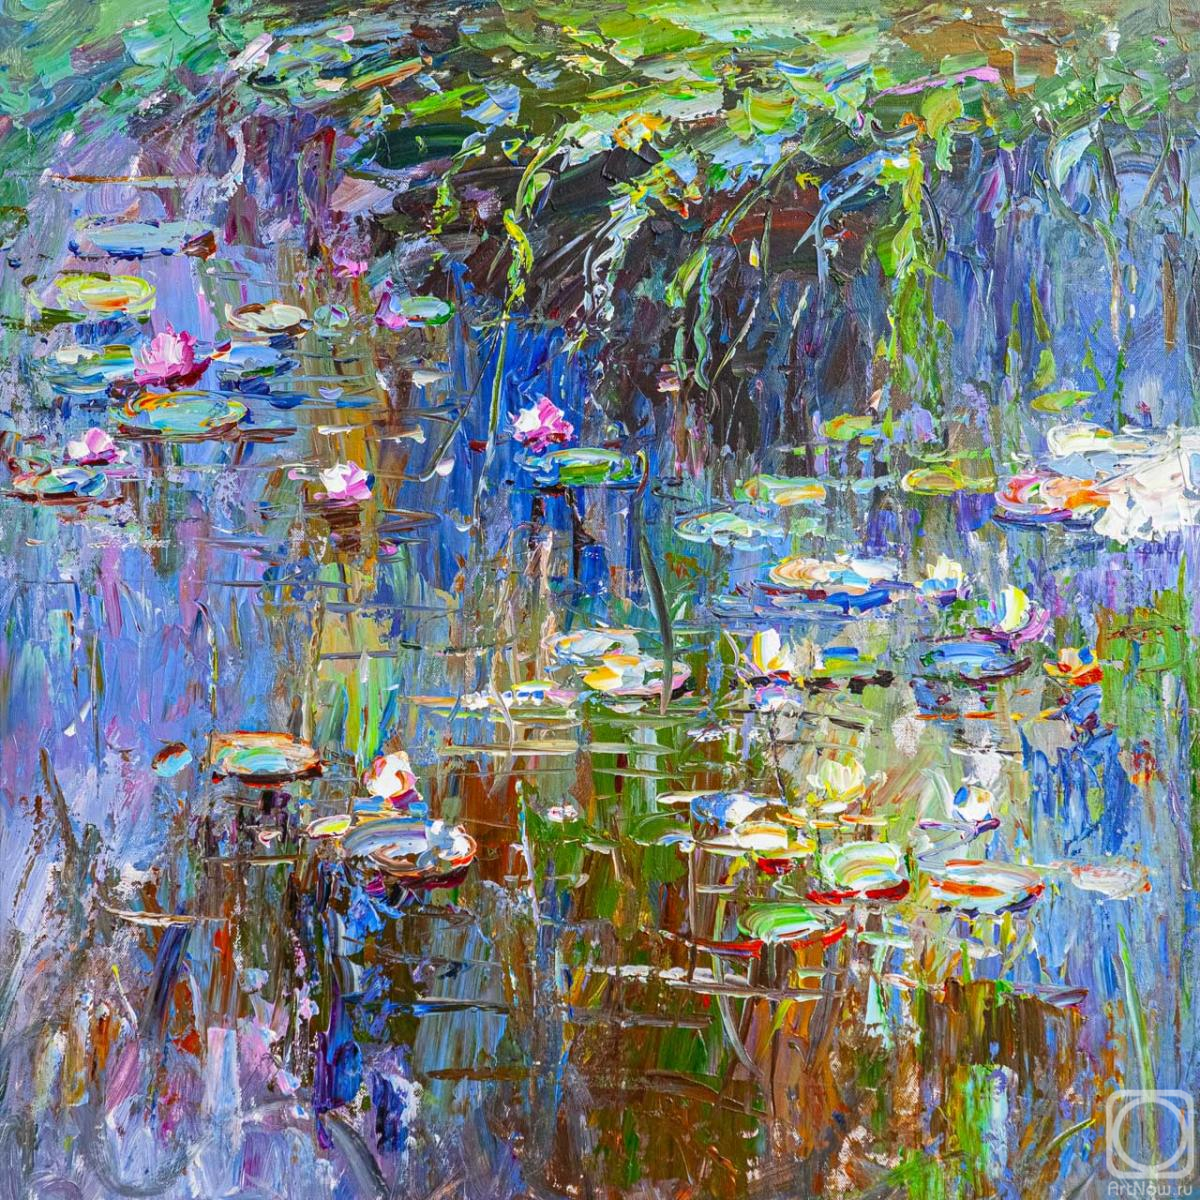 Rodries Jose. A free copy of the painting by Claude Monet. Water lilies, yellow and purple, 1917